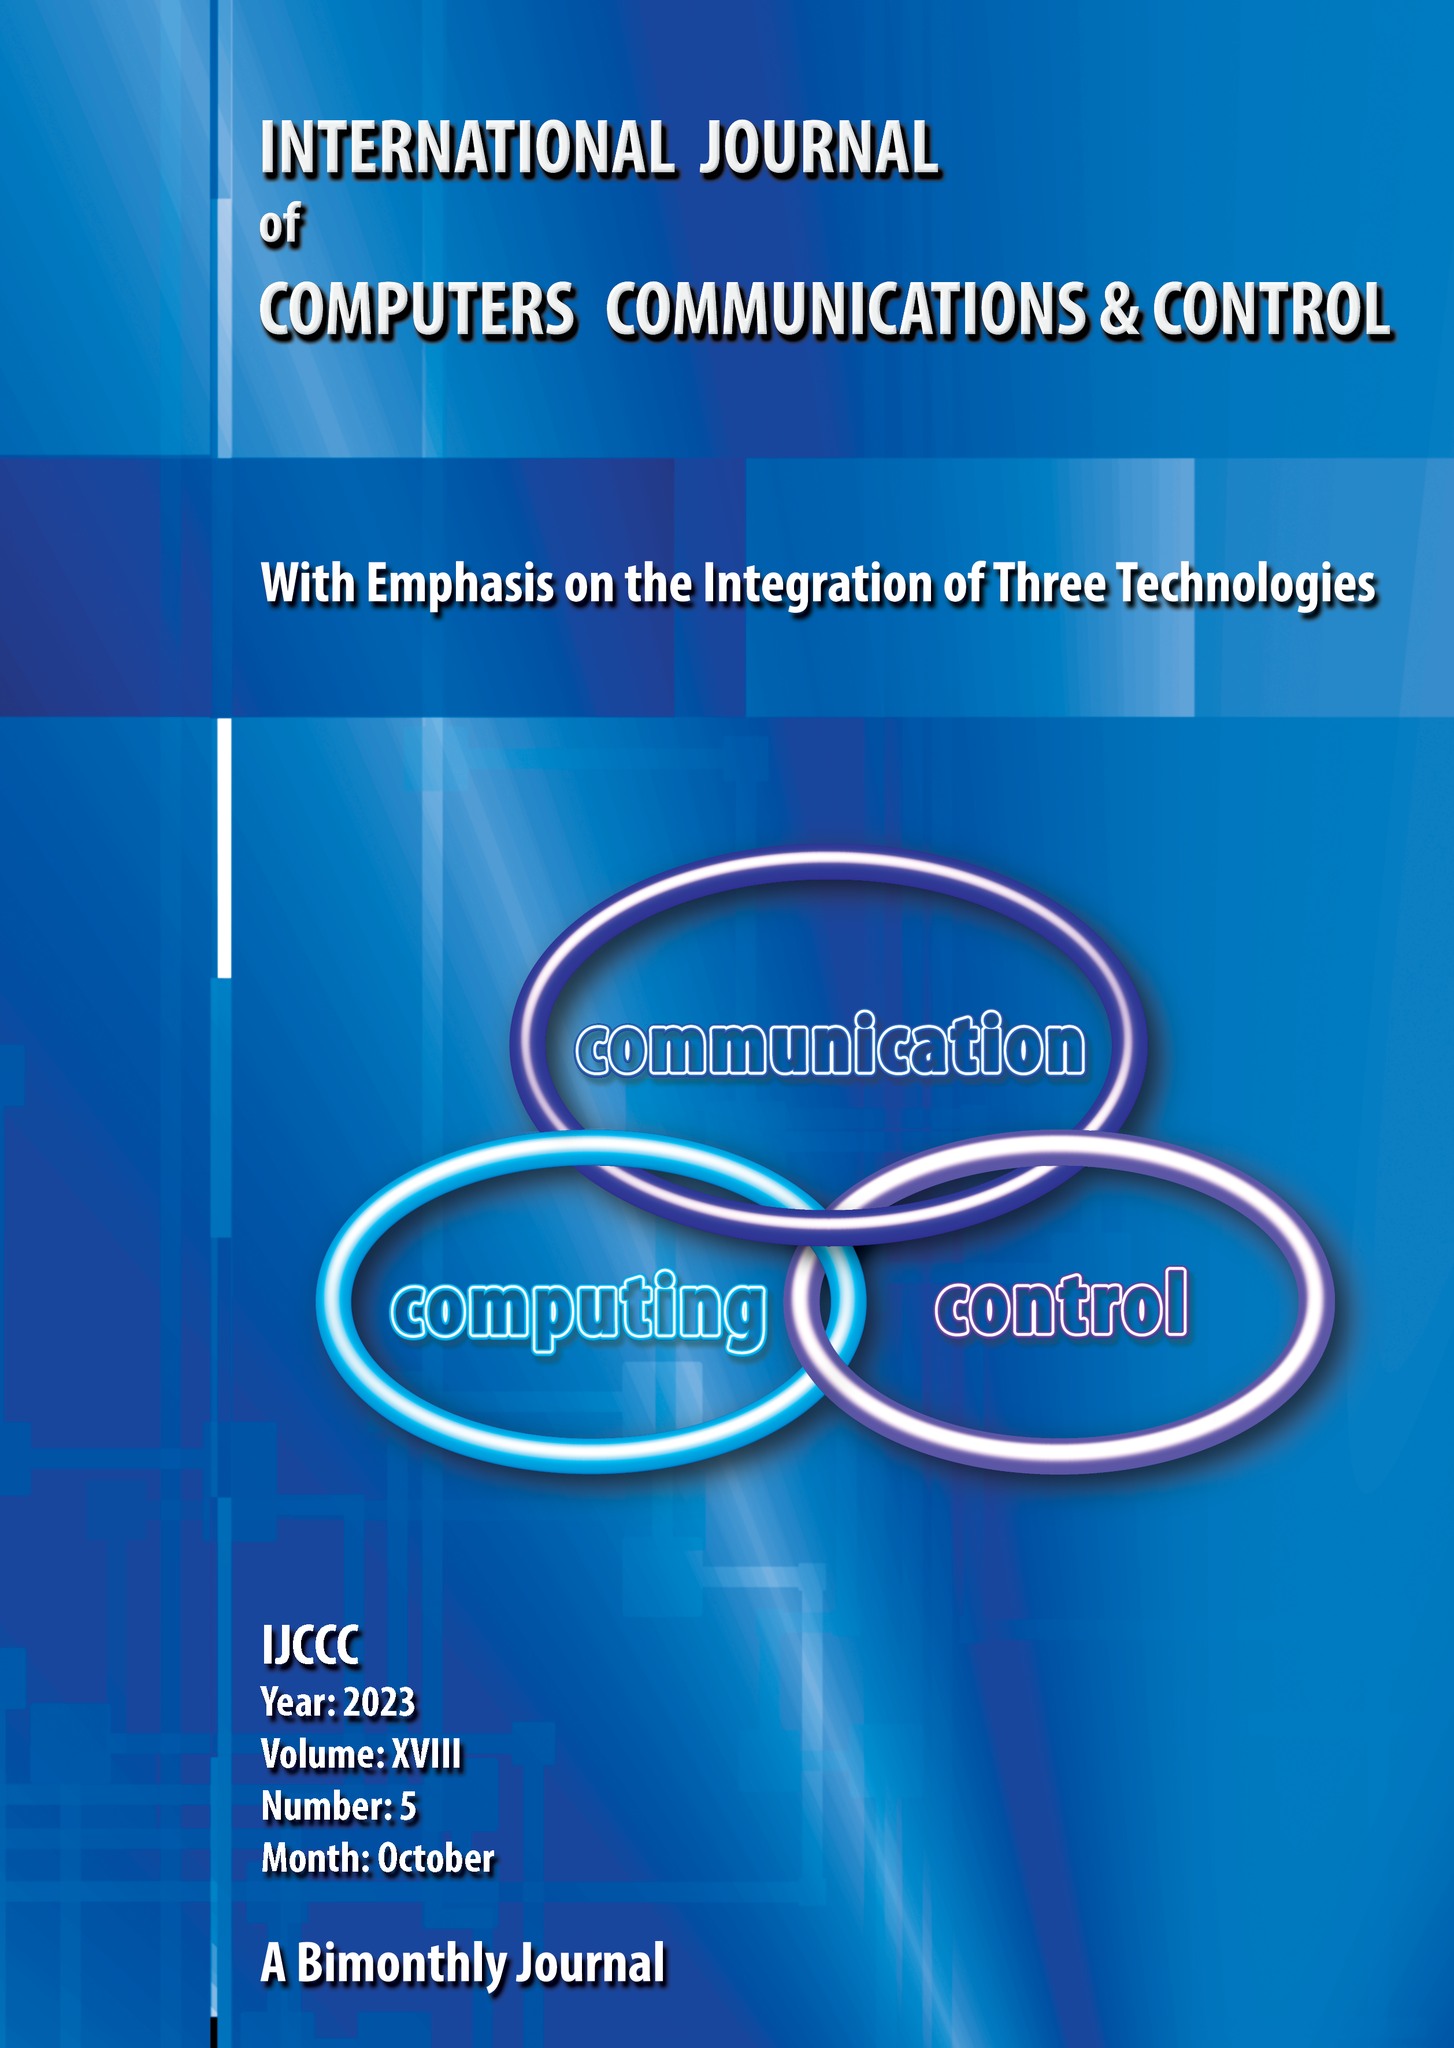 					View Vol. 18 No. 5 (2023): International Journal of Computers Communications & Control (October)
				